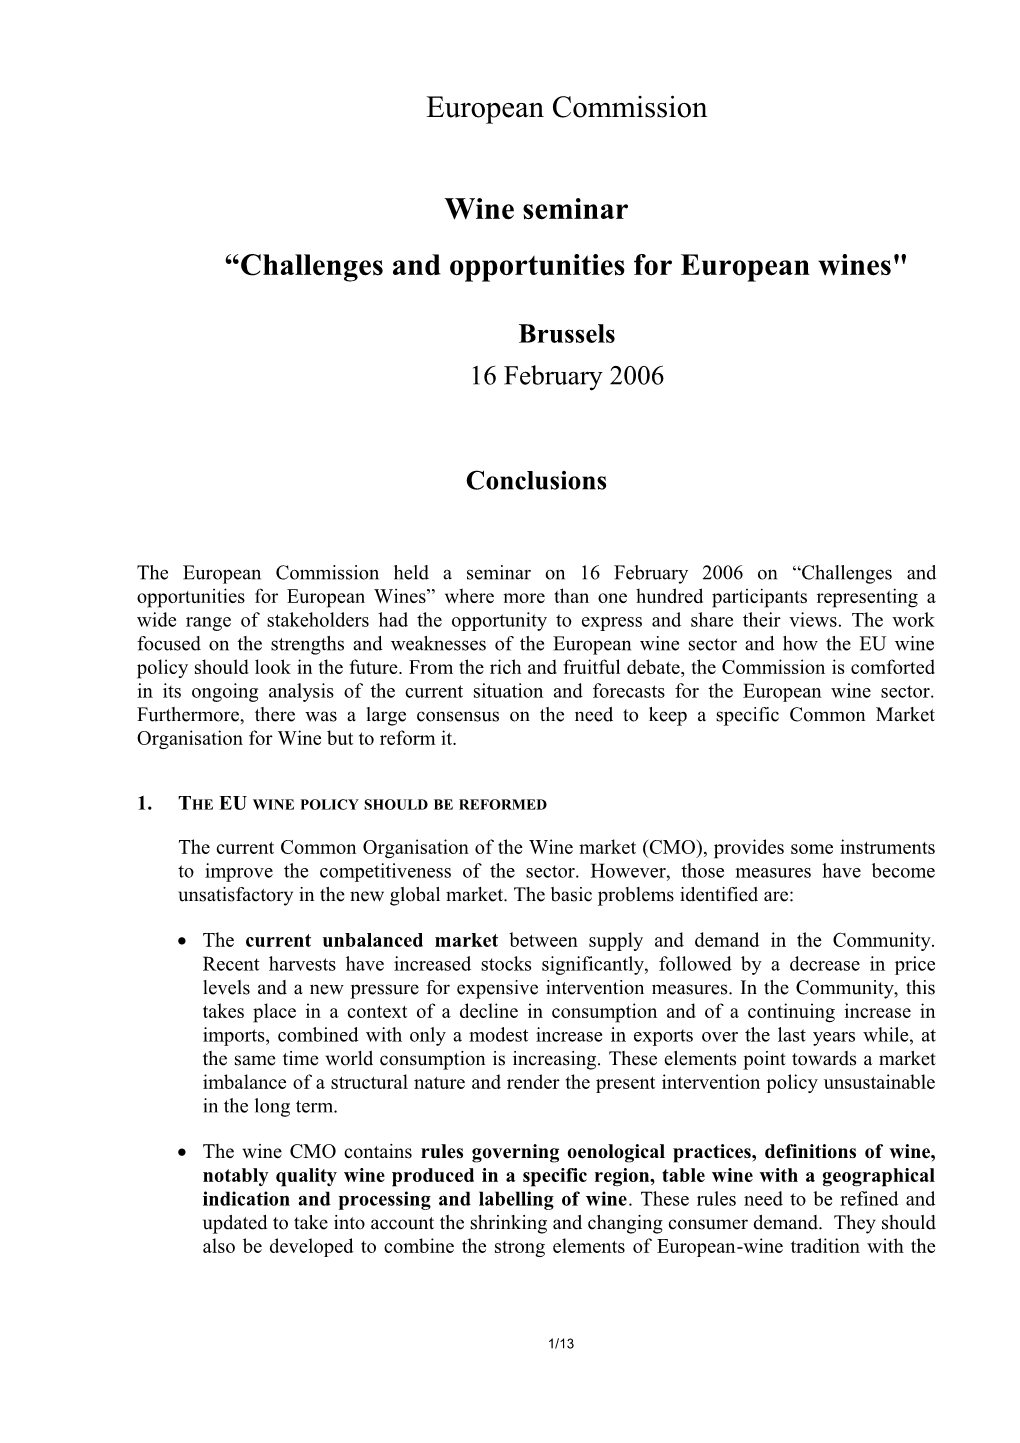 Challenges and Opportunities for European Wines